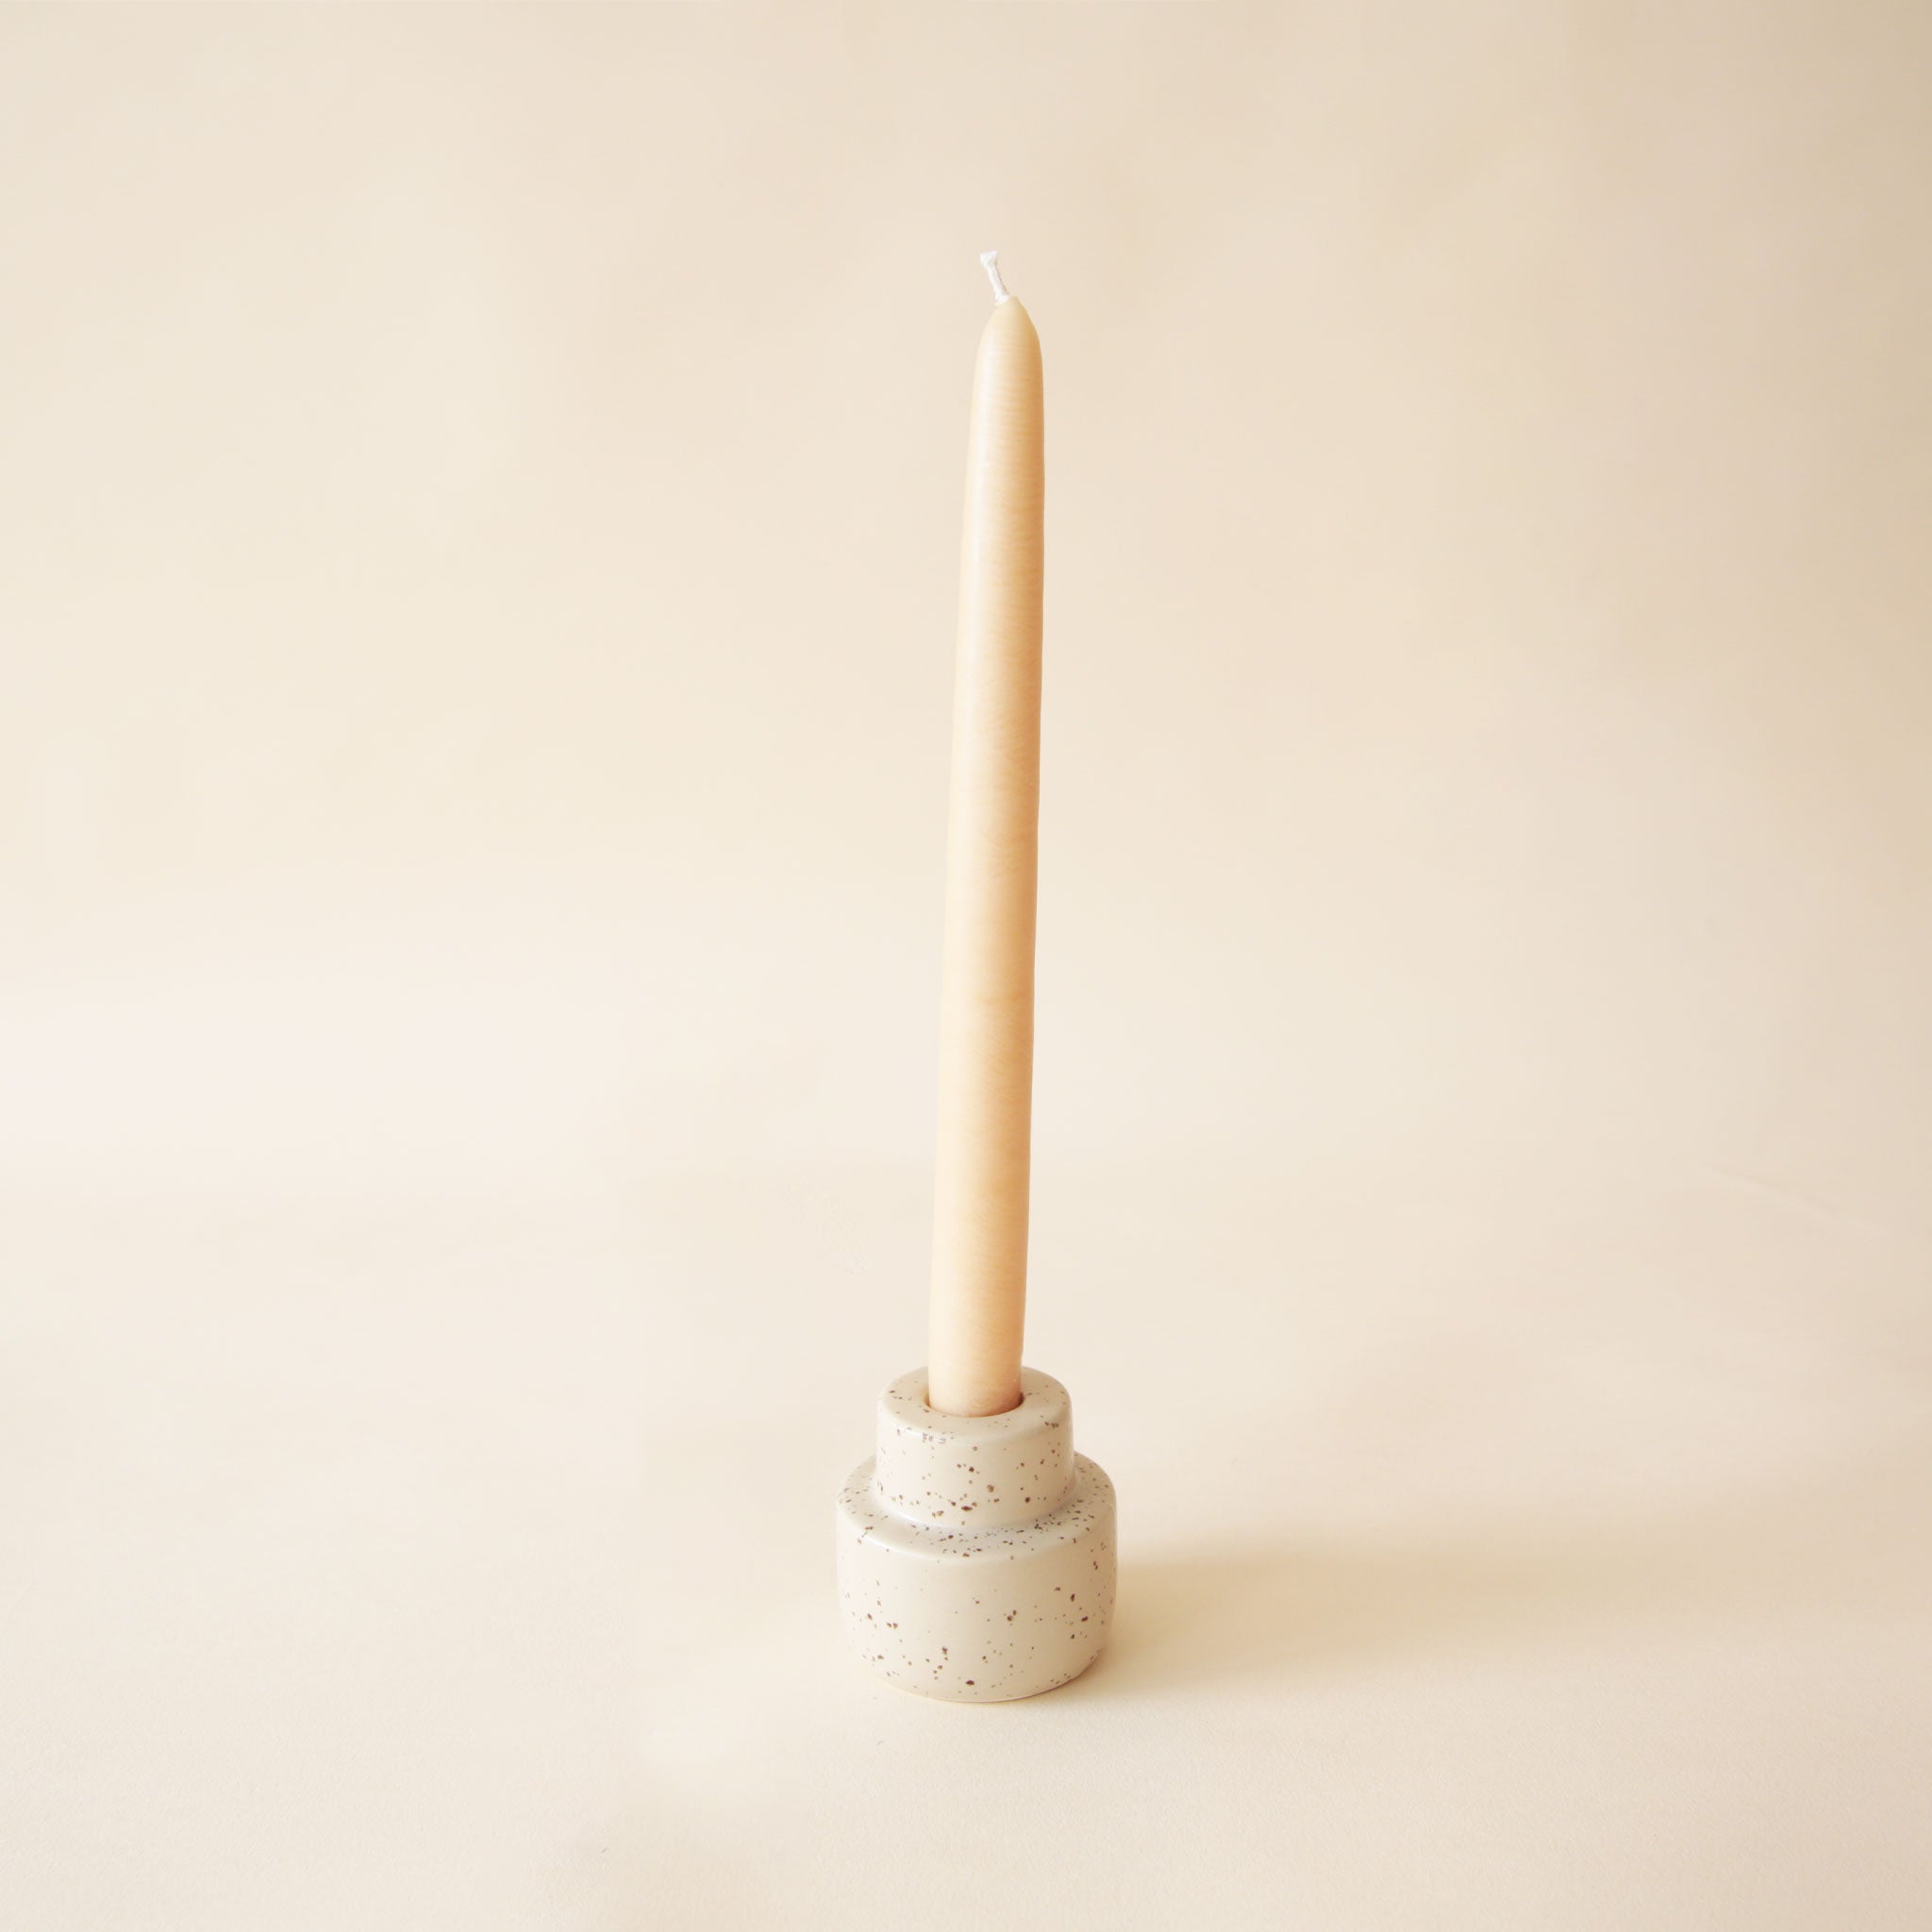 On a neutral background is an off-white ceramic candle holder with a taper candle in it that is sold separately. 